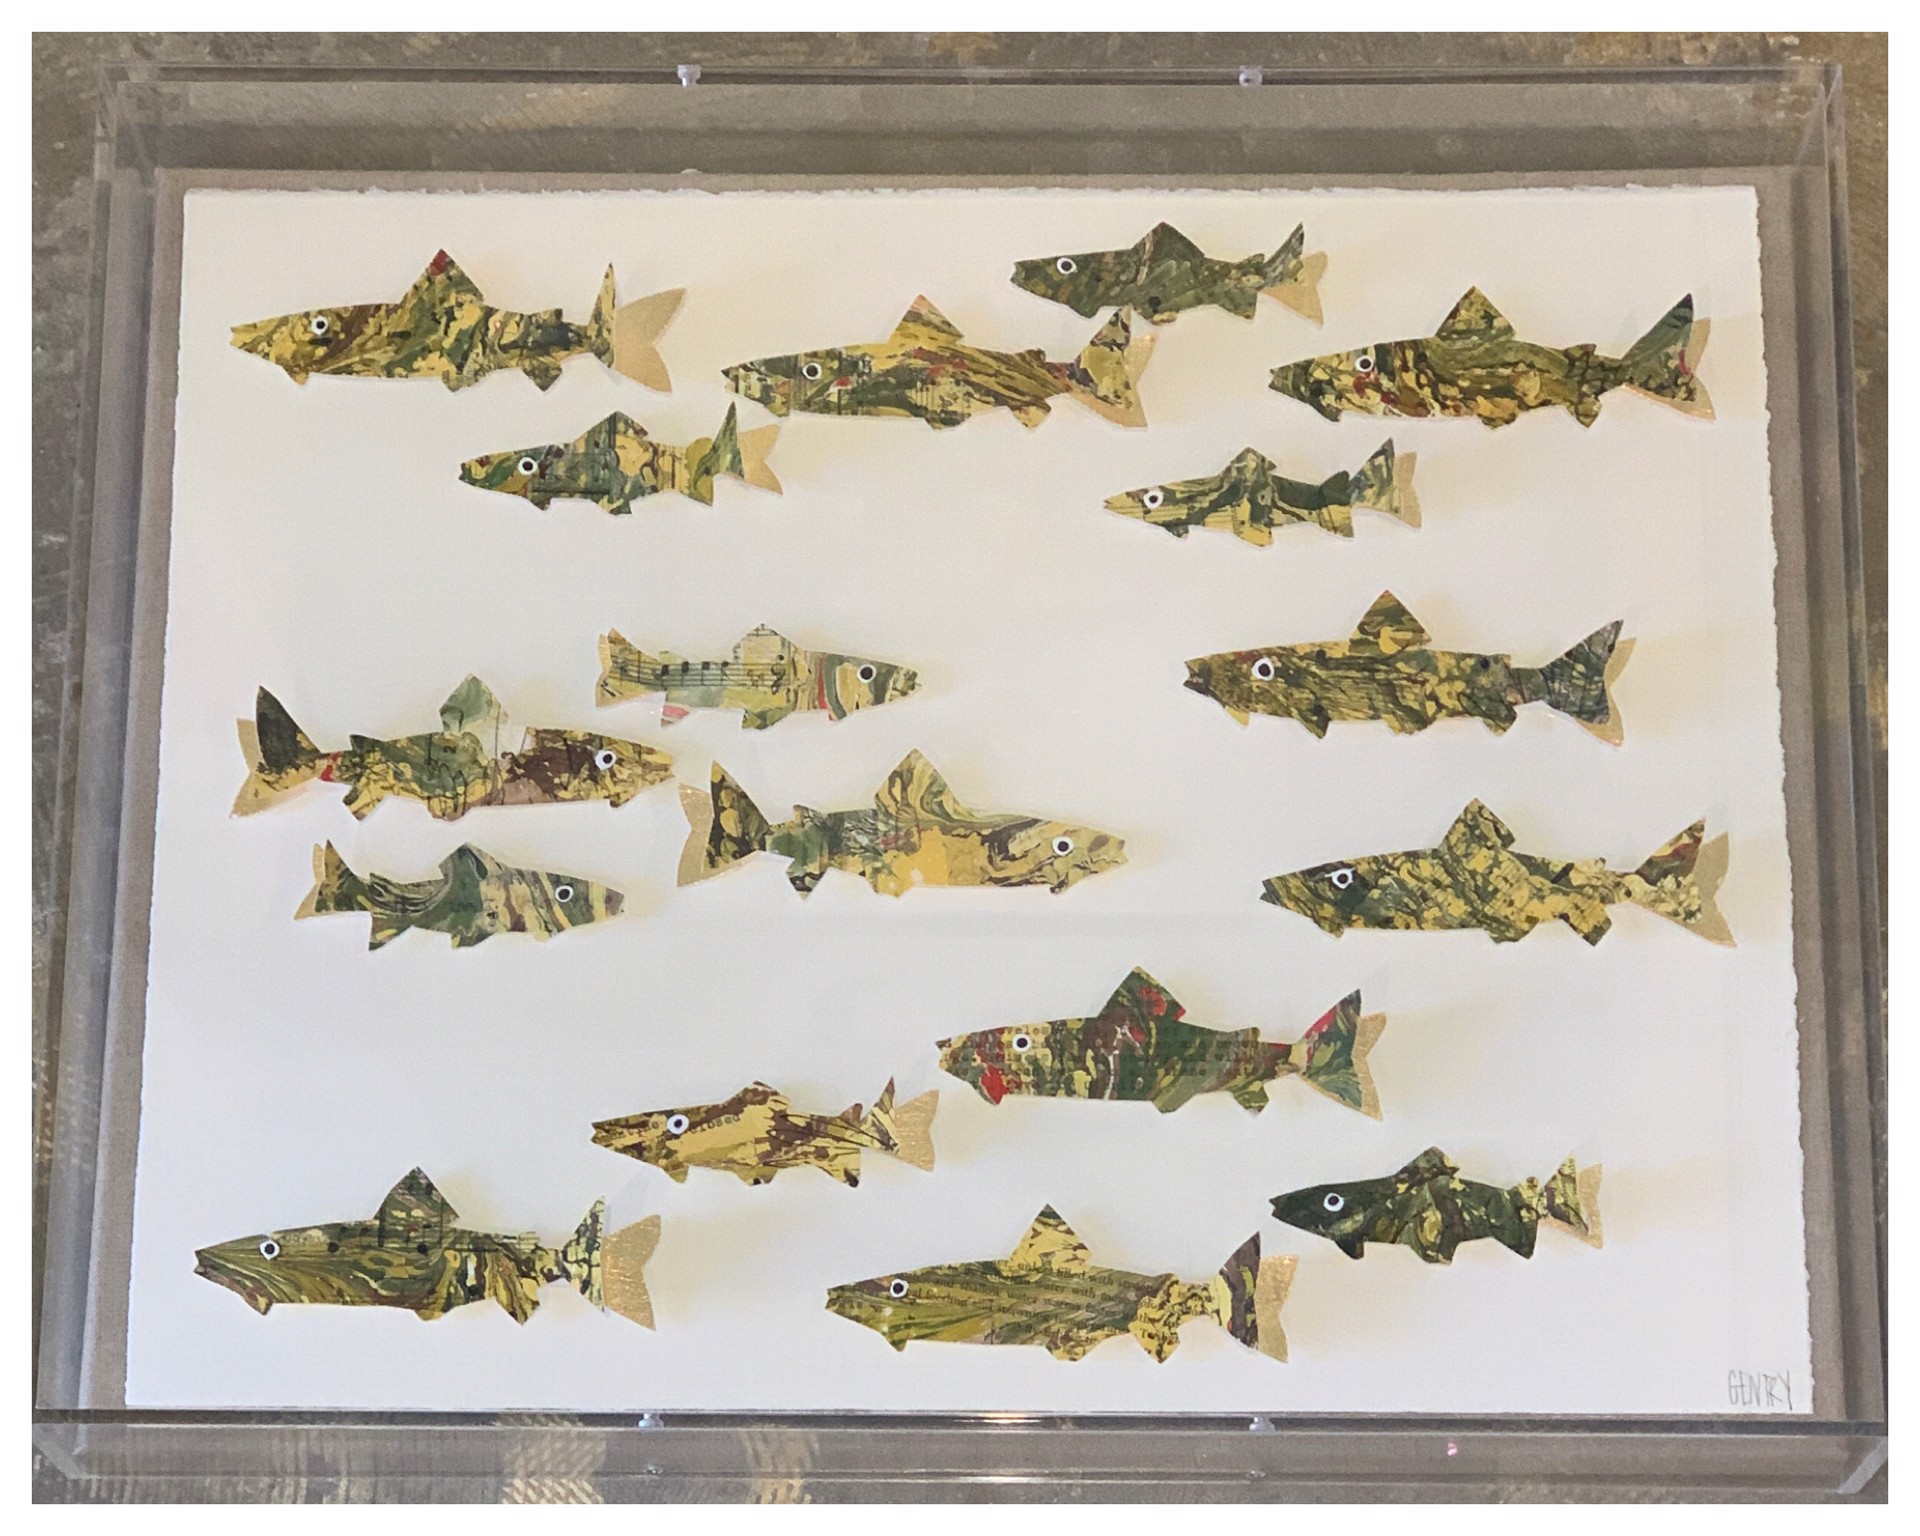 Fish Collage in Gold Tones 2 by Sarah Gentry